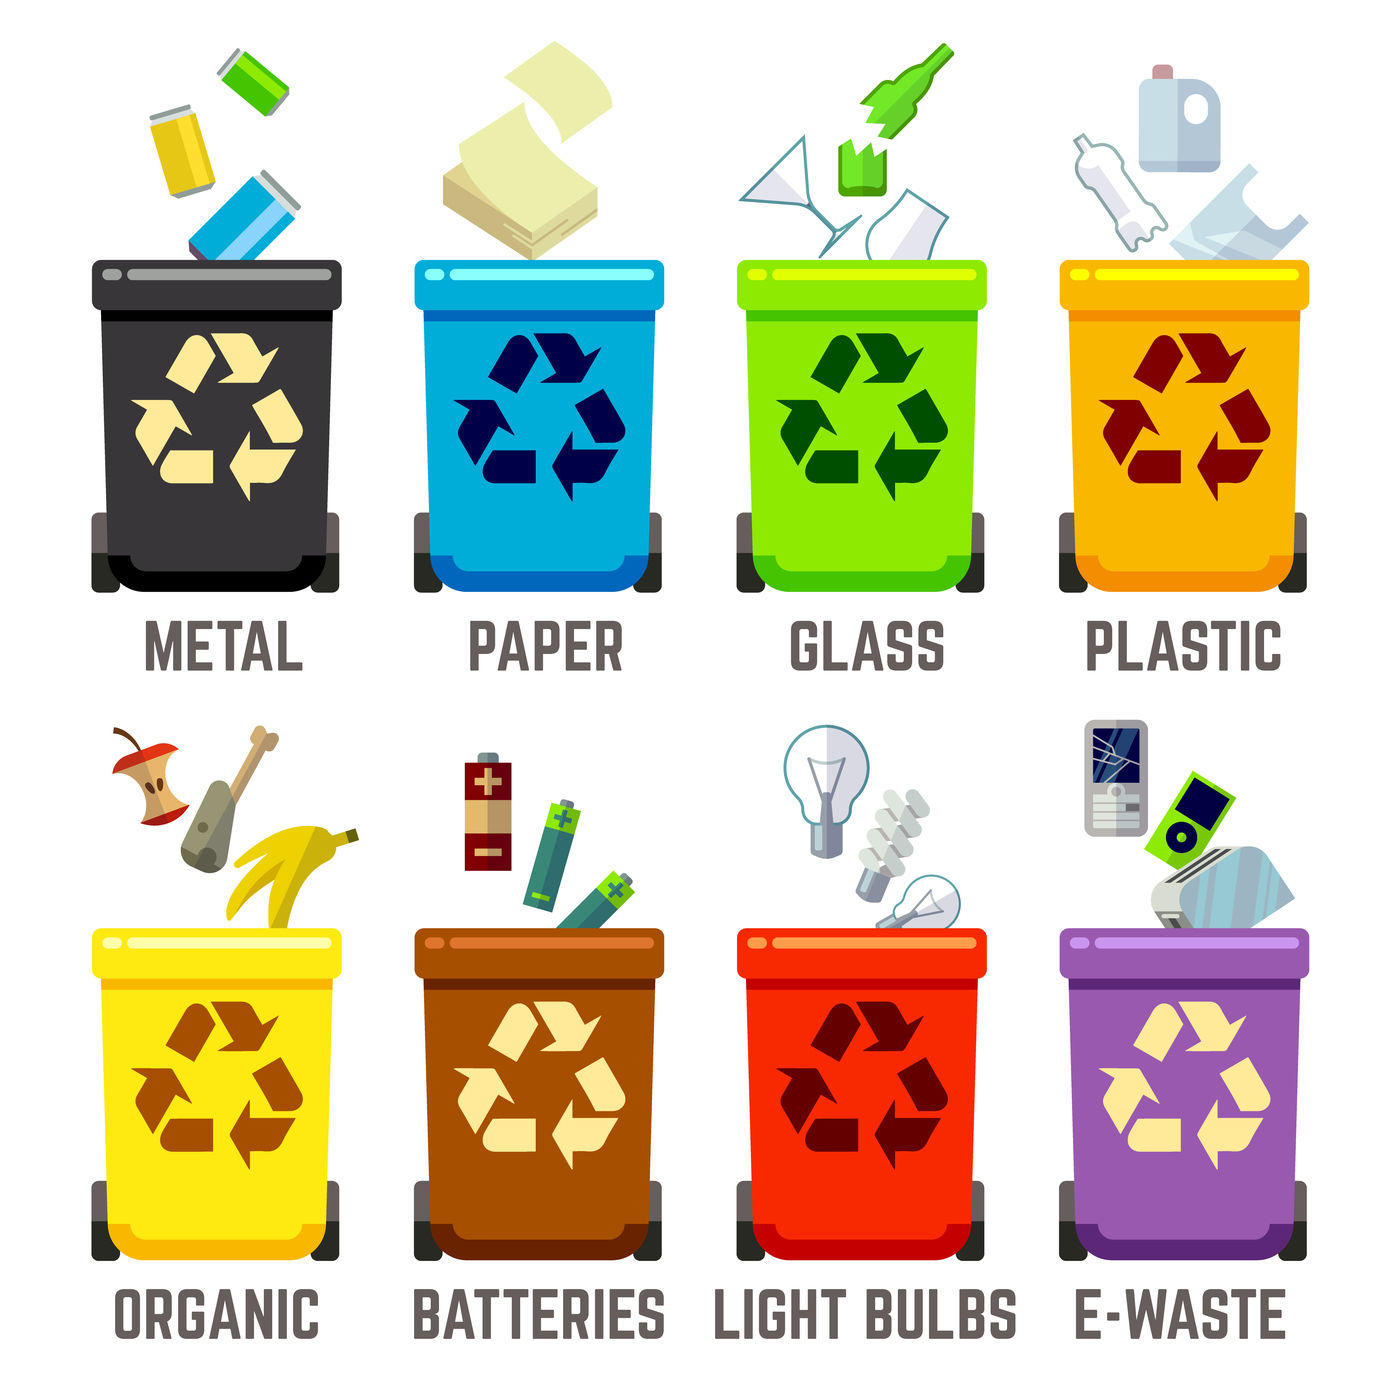 Advantages of Using a Waste Management Business